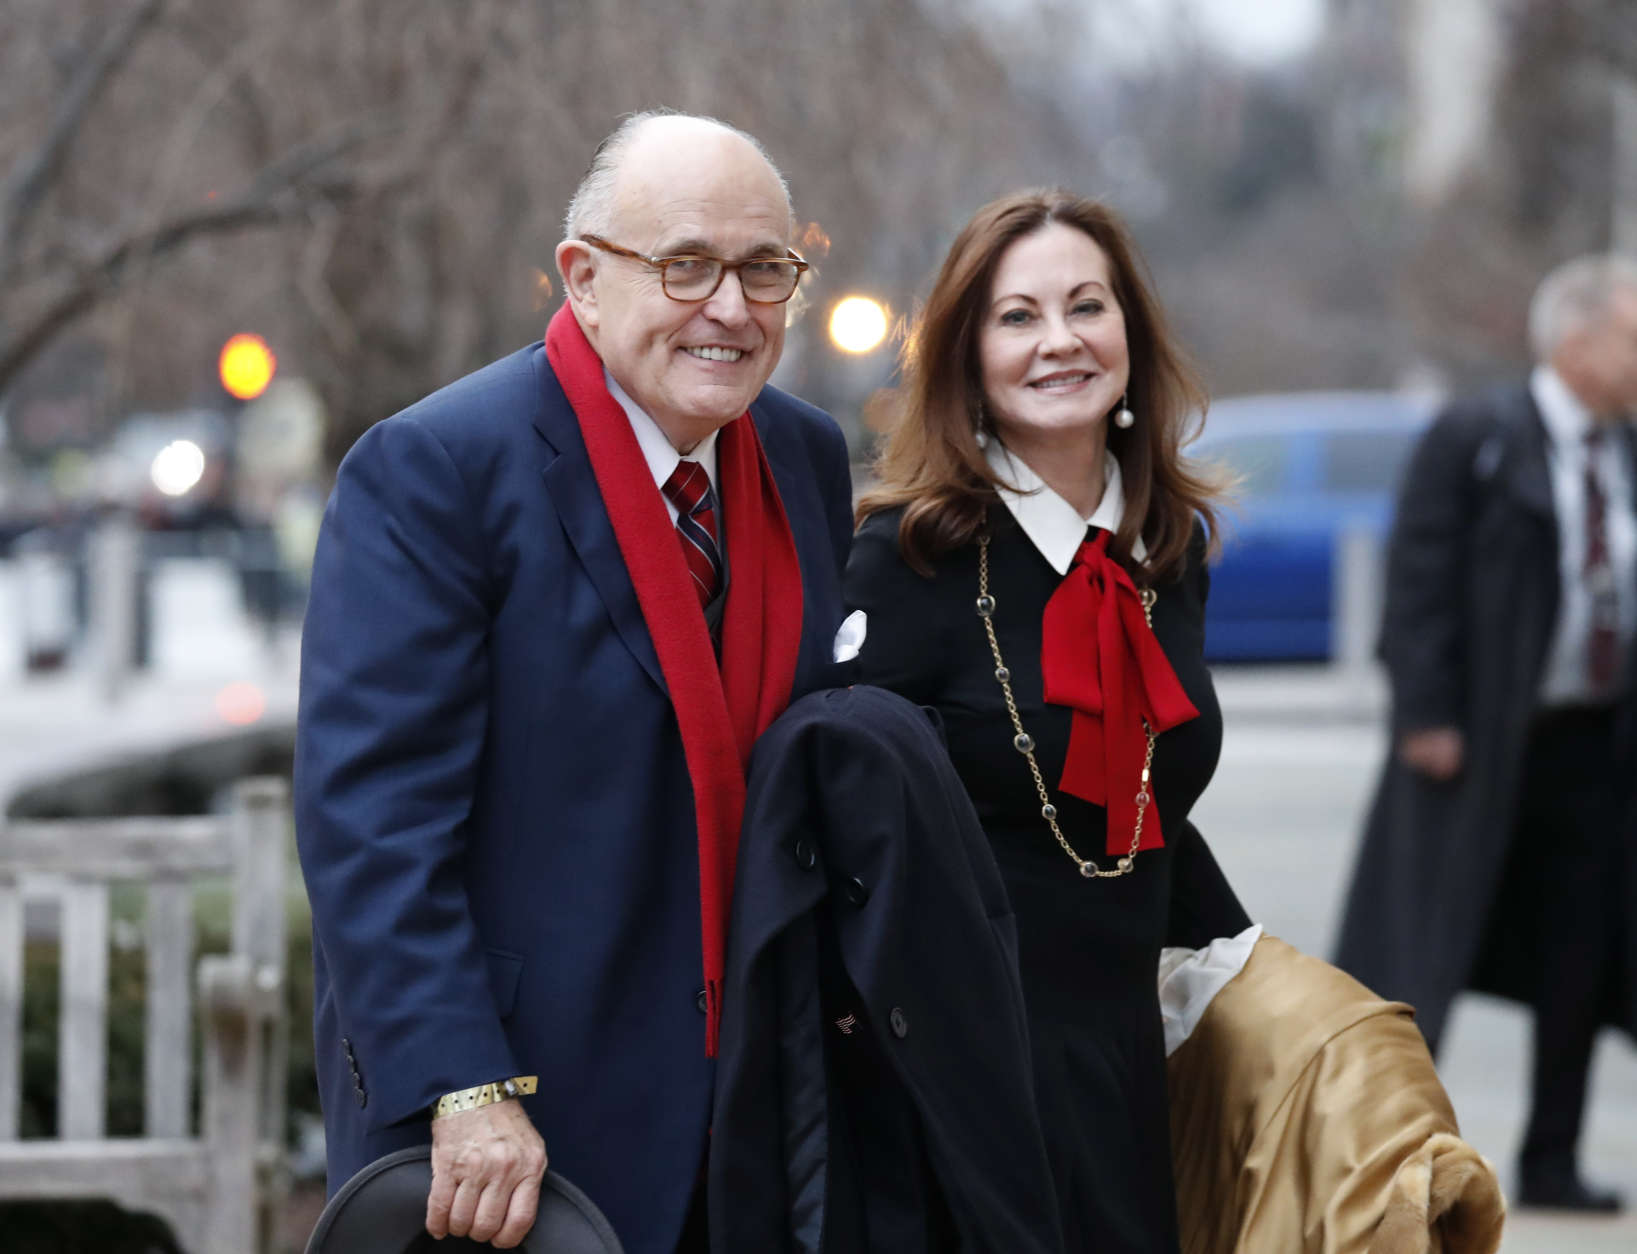 Rudy Giuliani and his wife Judith, arrives for a church service at St. John’s Episcopal Church across from the White House in Washington, Friday, Jan. 20, 2017, on Donald Trump's inauguration day. (AP Photo/Alex Brandon)